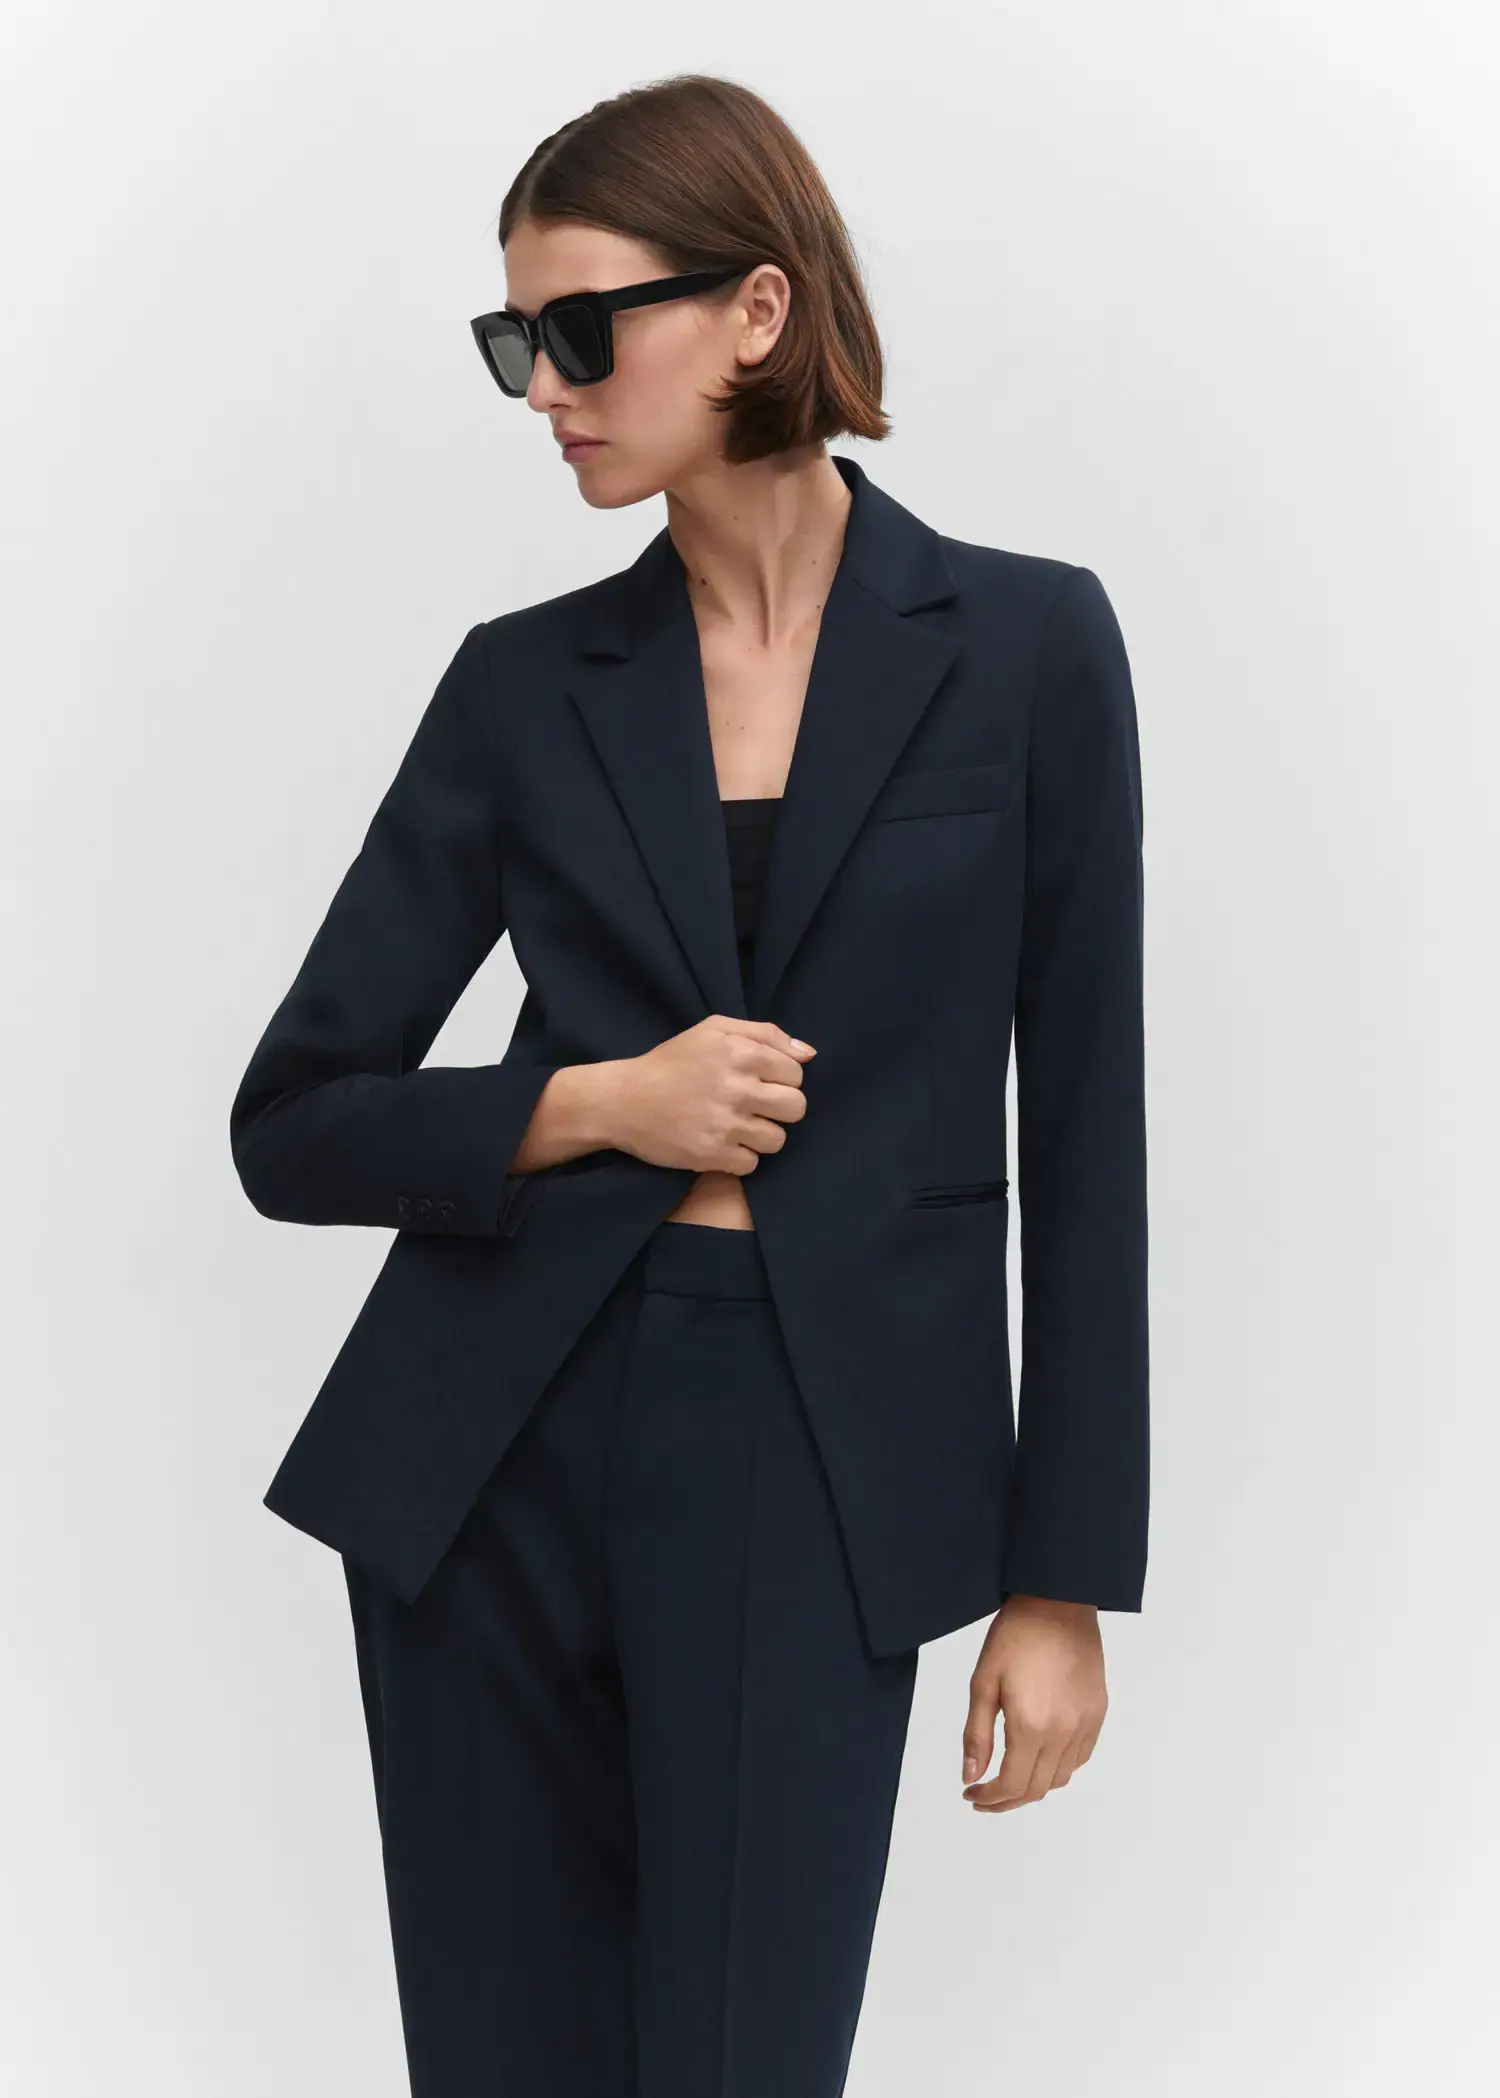 Mango Fitted suit jacket. a woman wearing a black suit and sunglasses. 